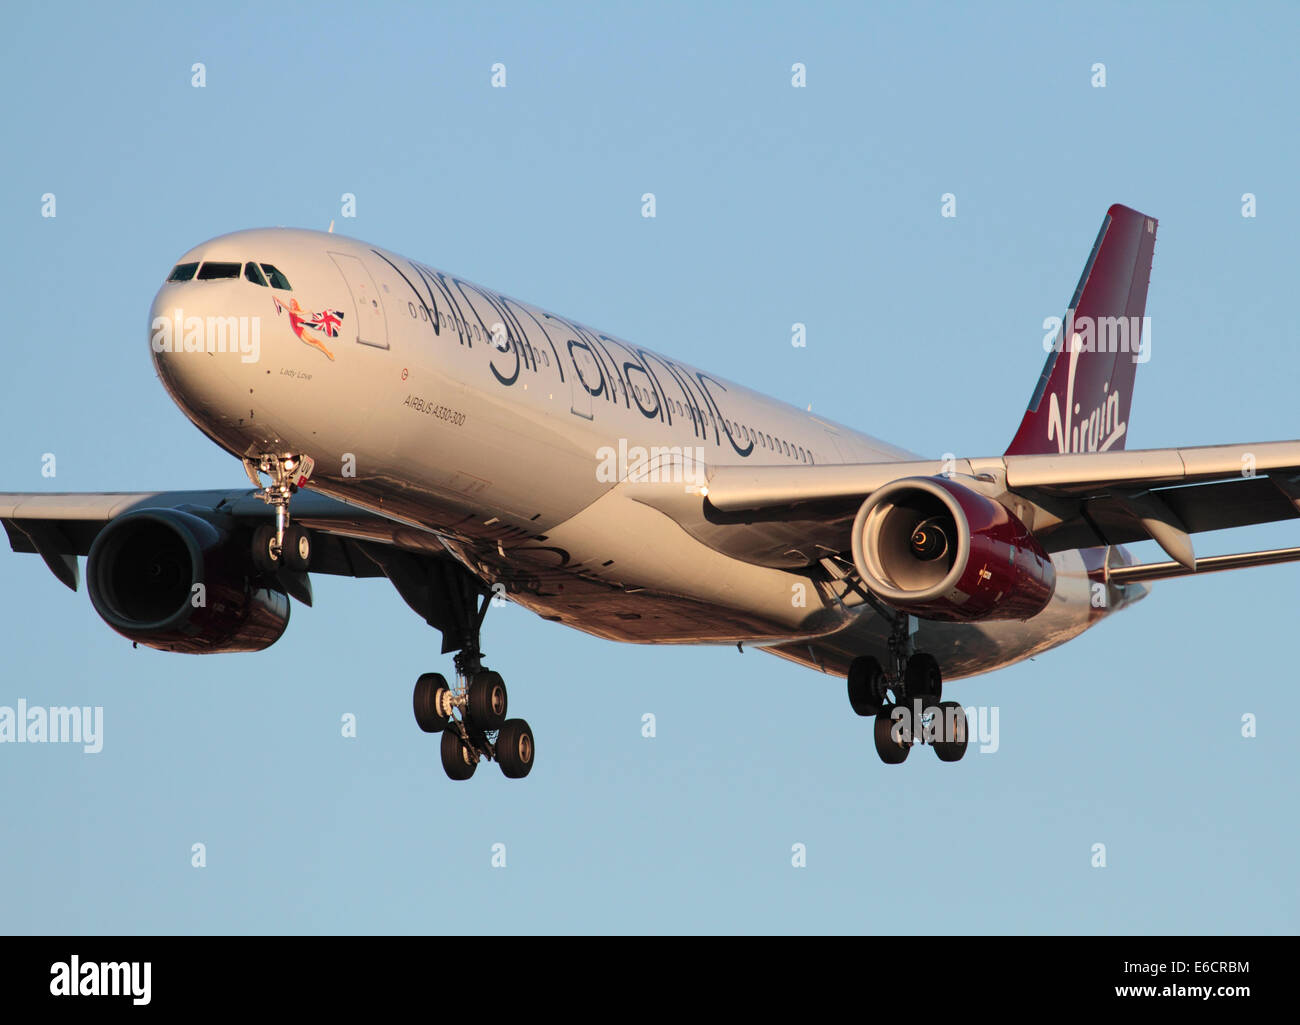 Virgin Atlantic Airways Airbus A330-300 long haul passenger jet plane flying on approach at sunset against a clear blue sky. Closeup front view. Stock Photo